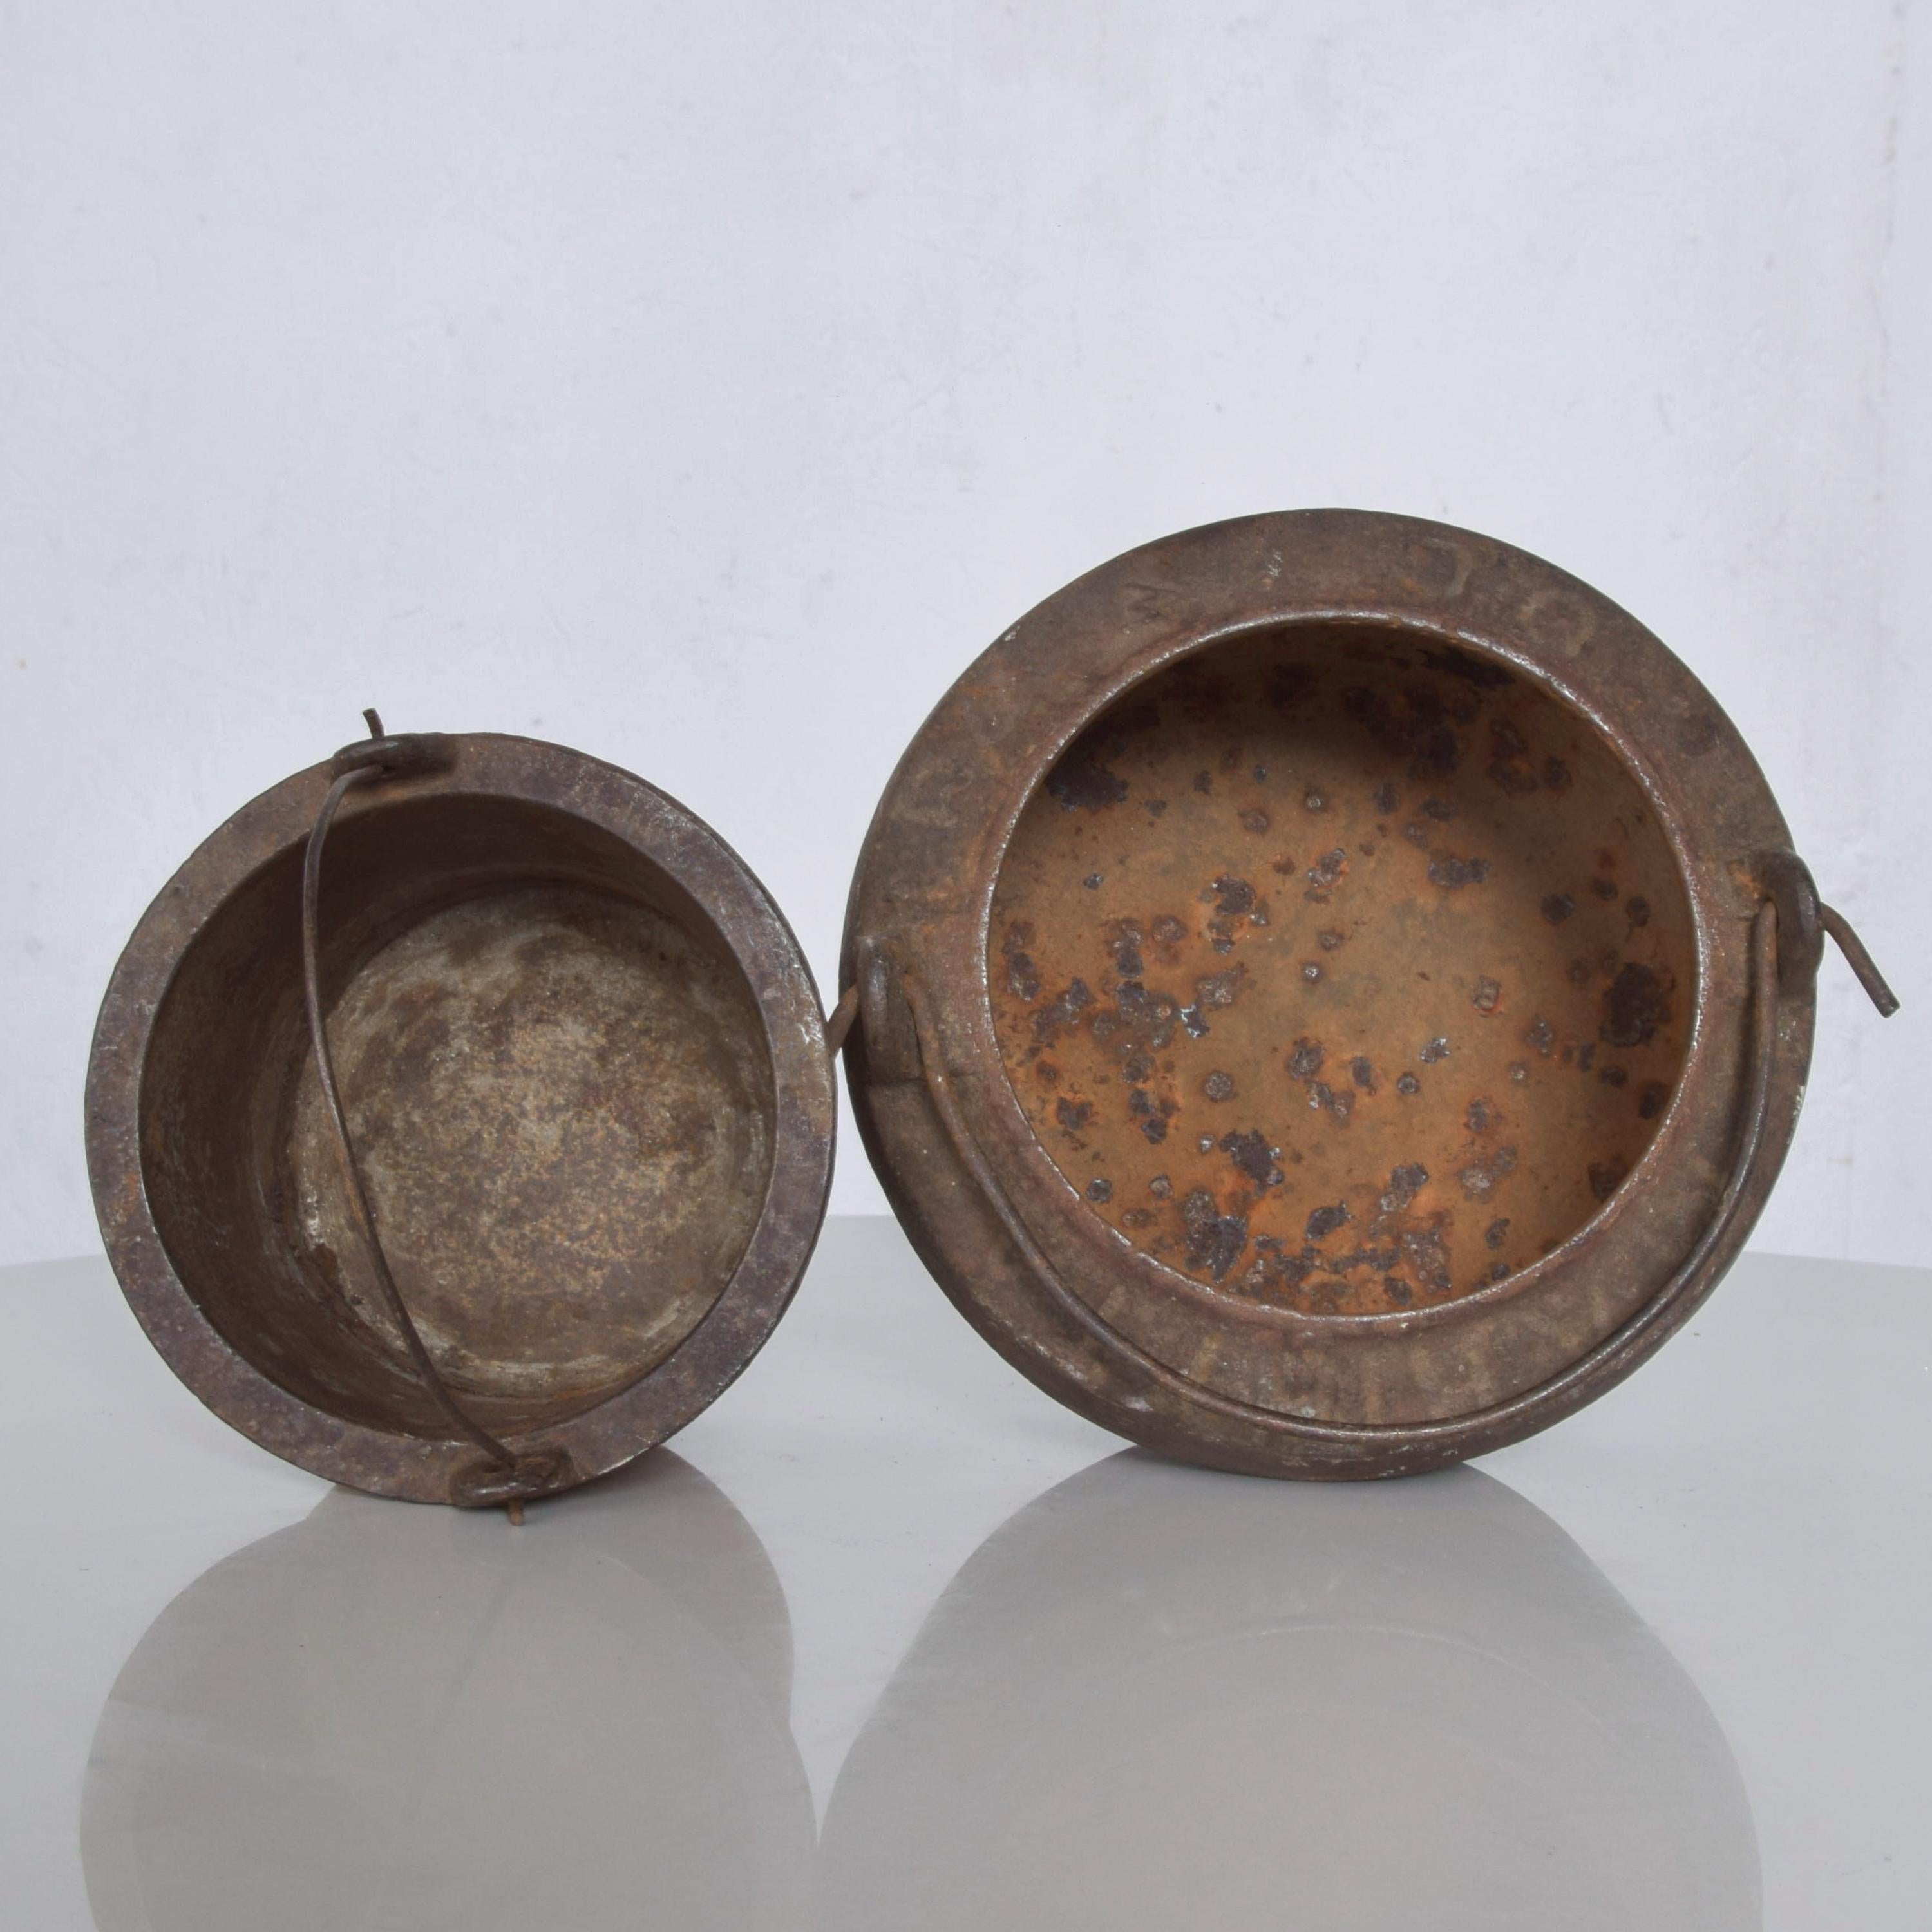 Rustic Set of Foundry Melting Pots Industrial Patinated Cauldron  1